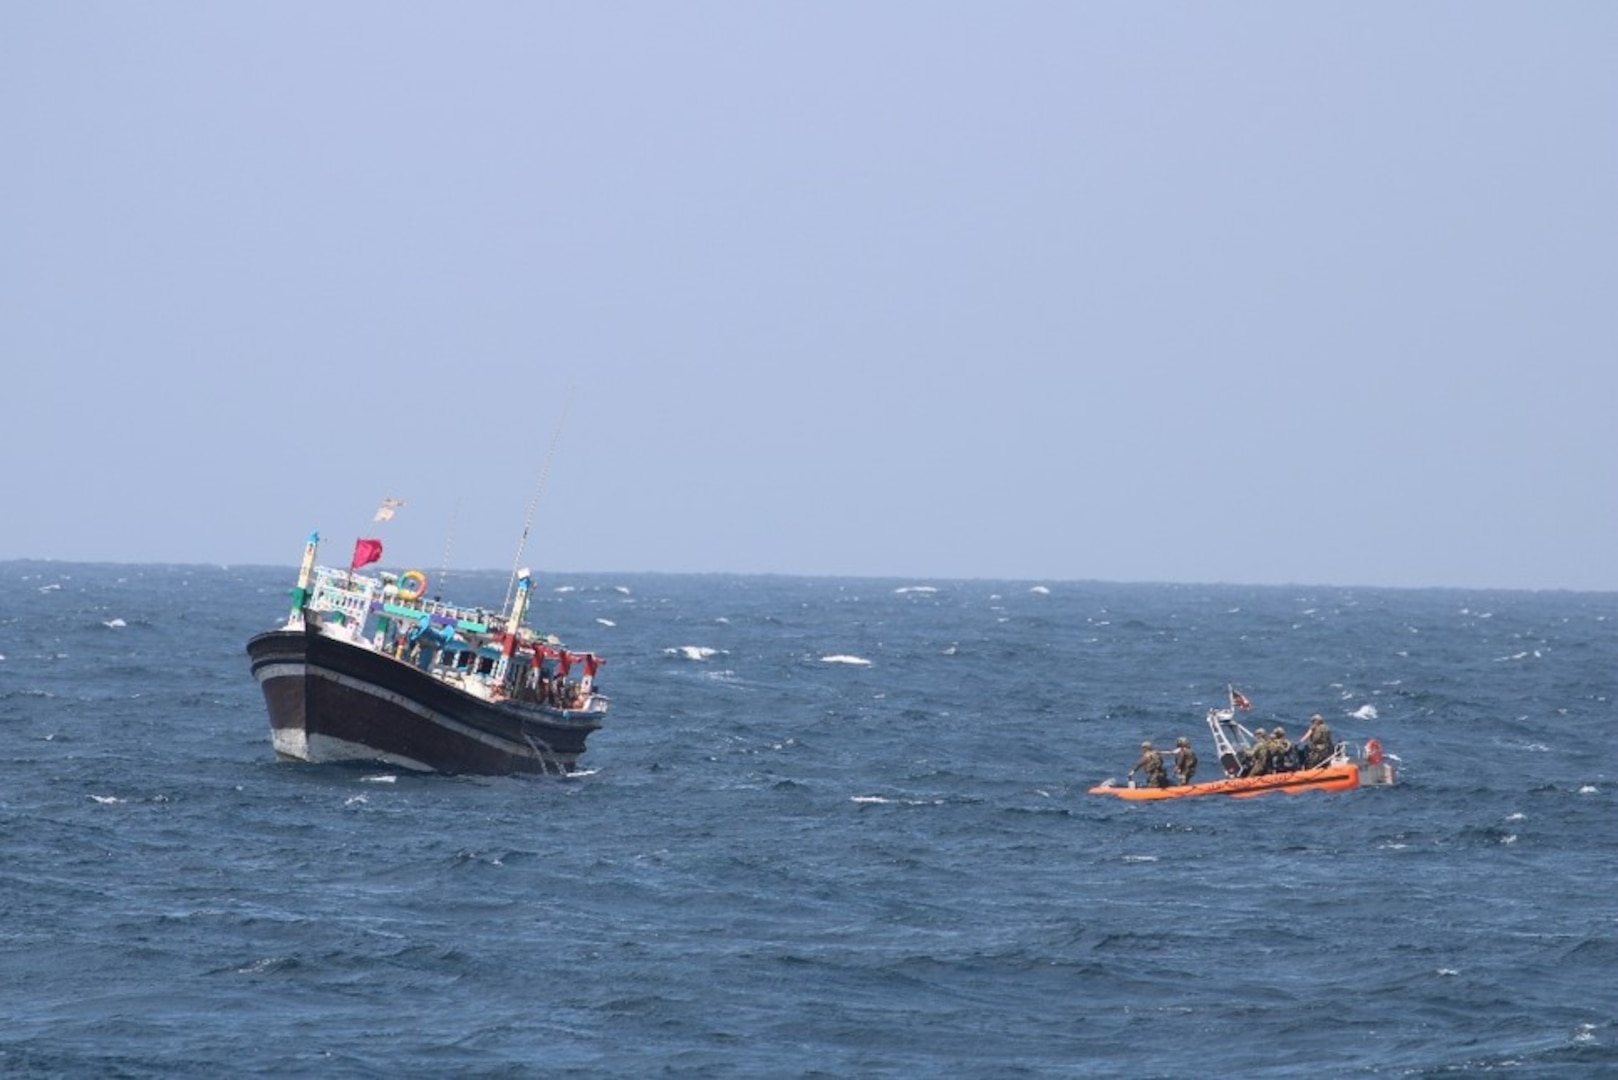 GULF OF OMAN (Aug. 30, 2022) Personnel from U.S. Coast Guard fast response cutter USCGC Glen Harris (WPC 1144) interdict a fishing vessel smuggling illegal narcotics in the Gulf of Oman, Aug. 30.